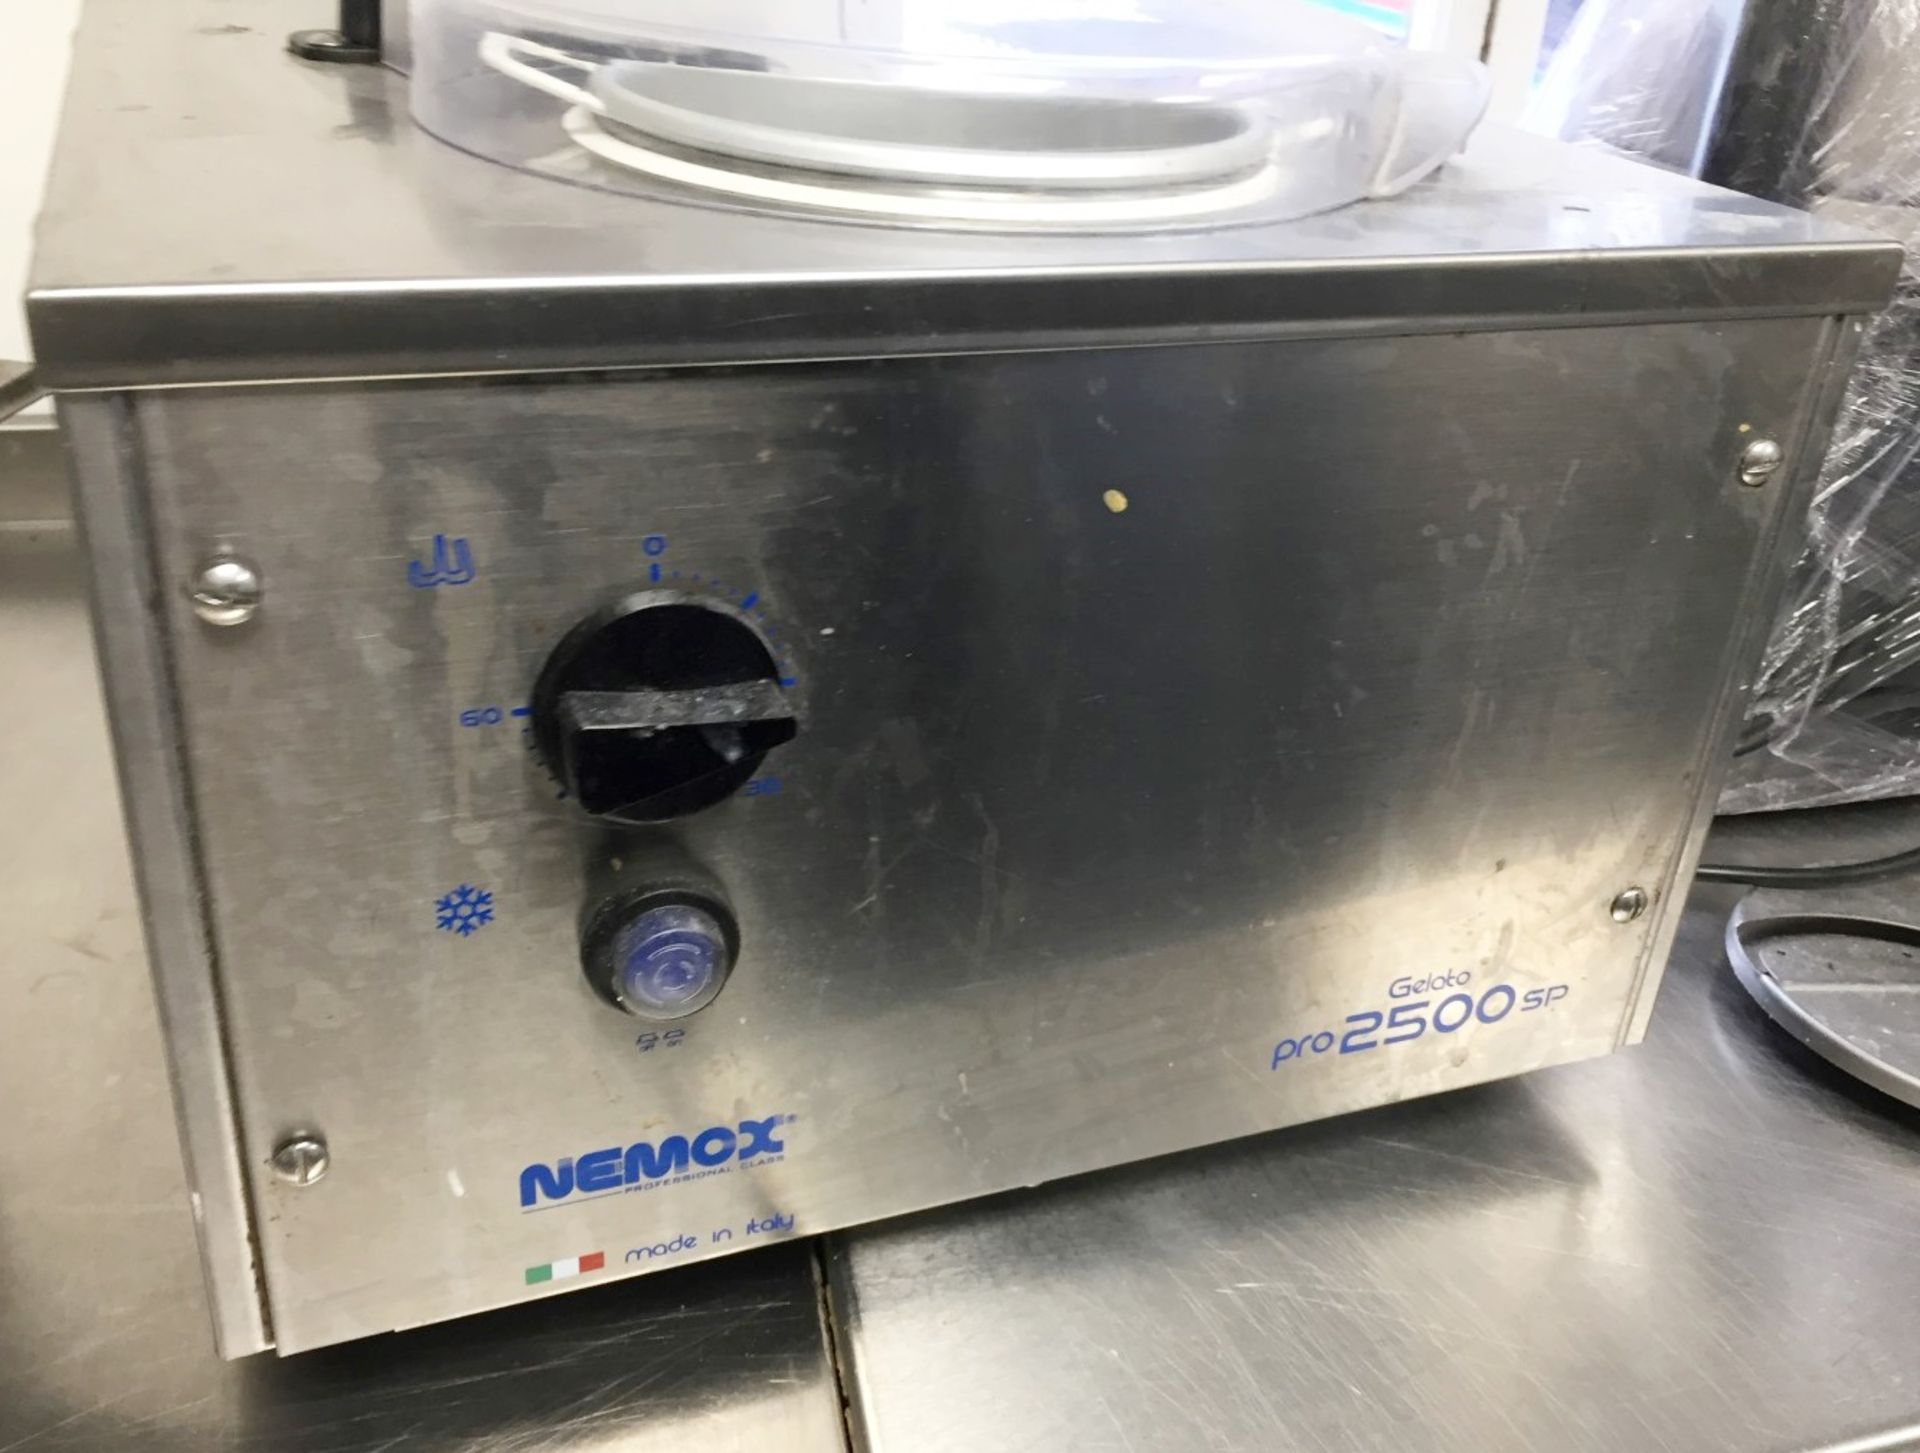 1 x Nemox Gelato 2.5 Litre 2500SP Commercial Ice Cream Machine - Stainless Steel - Made In Italy - O - Image 3 of 7